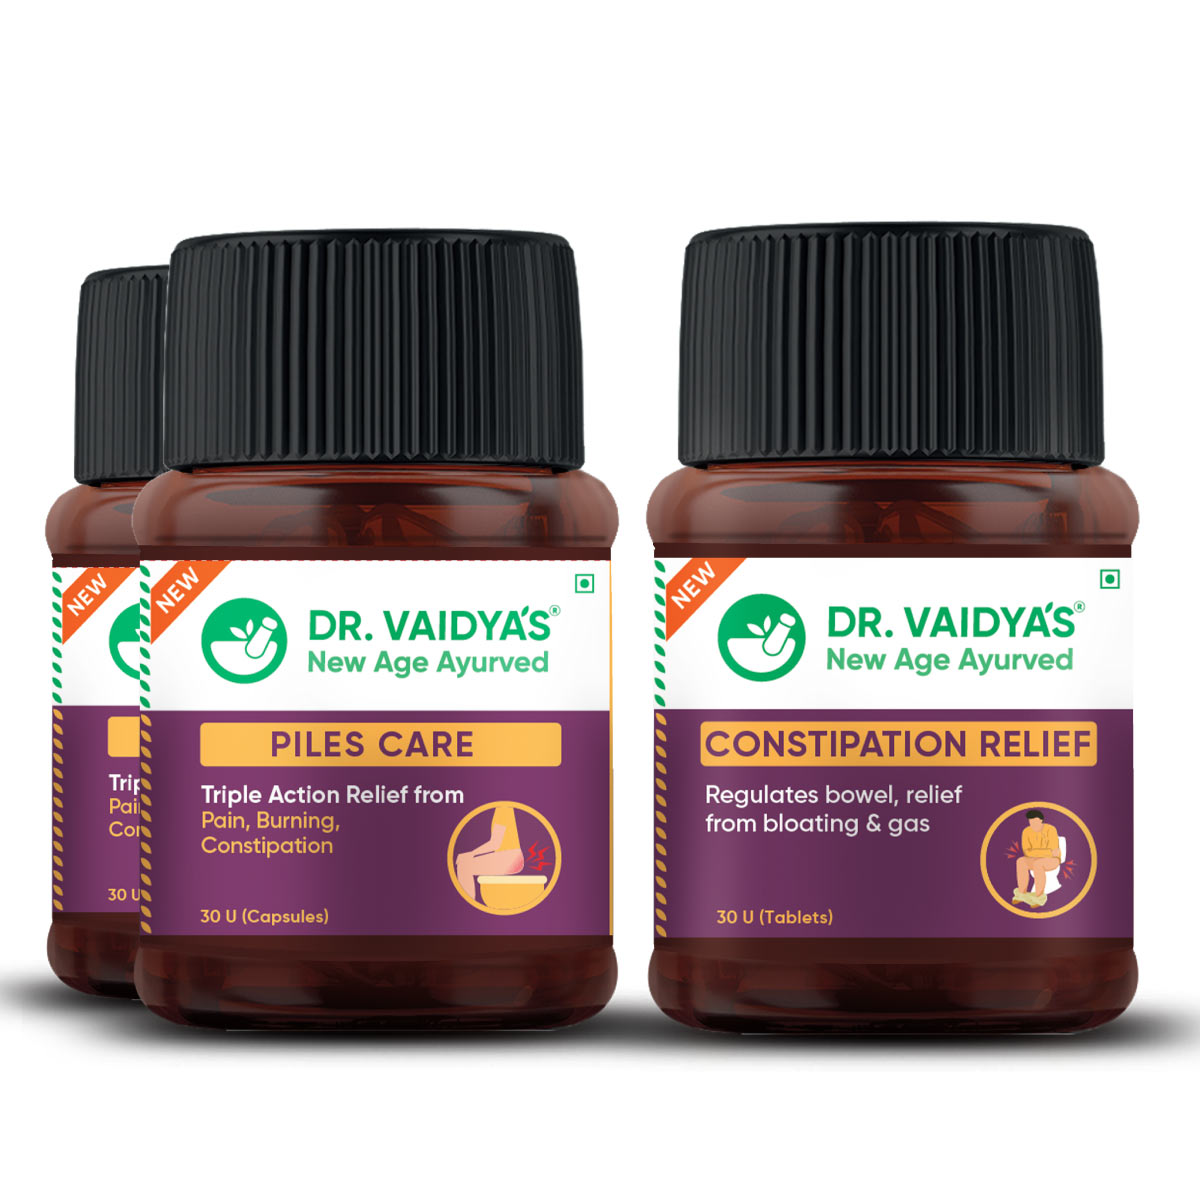 Dr. Vaidya's Piles Relief Pack: For Managing Piles & Constipation